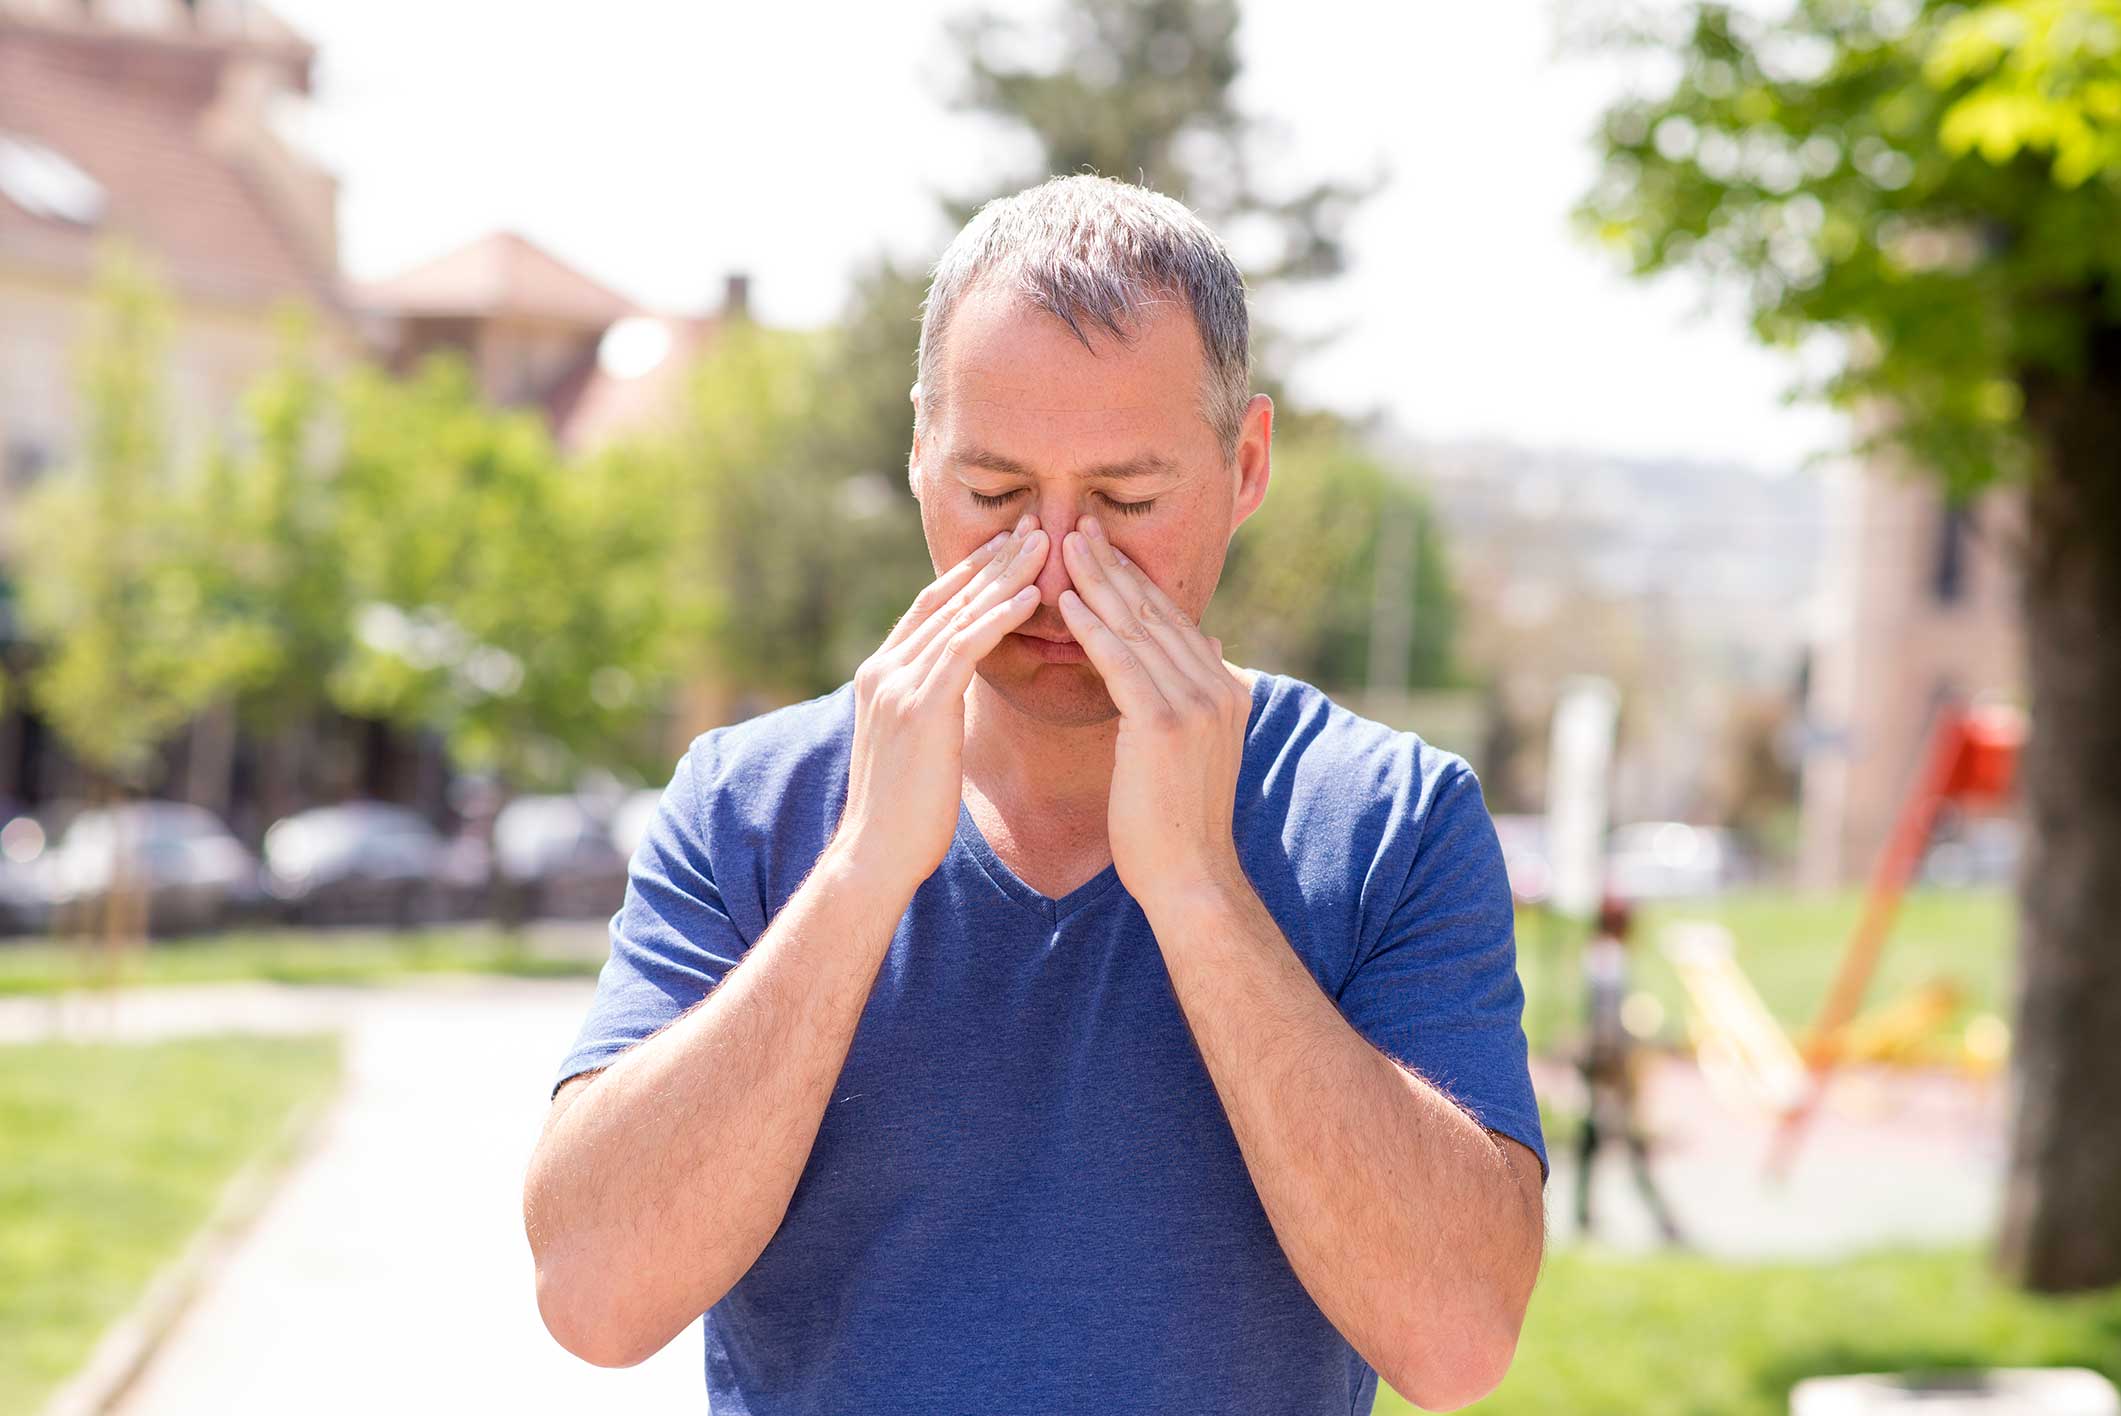 A man holding his face trying to relief sinus pressure.